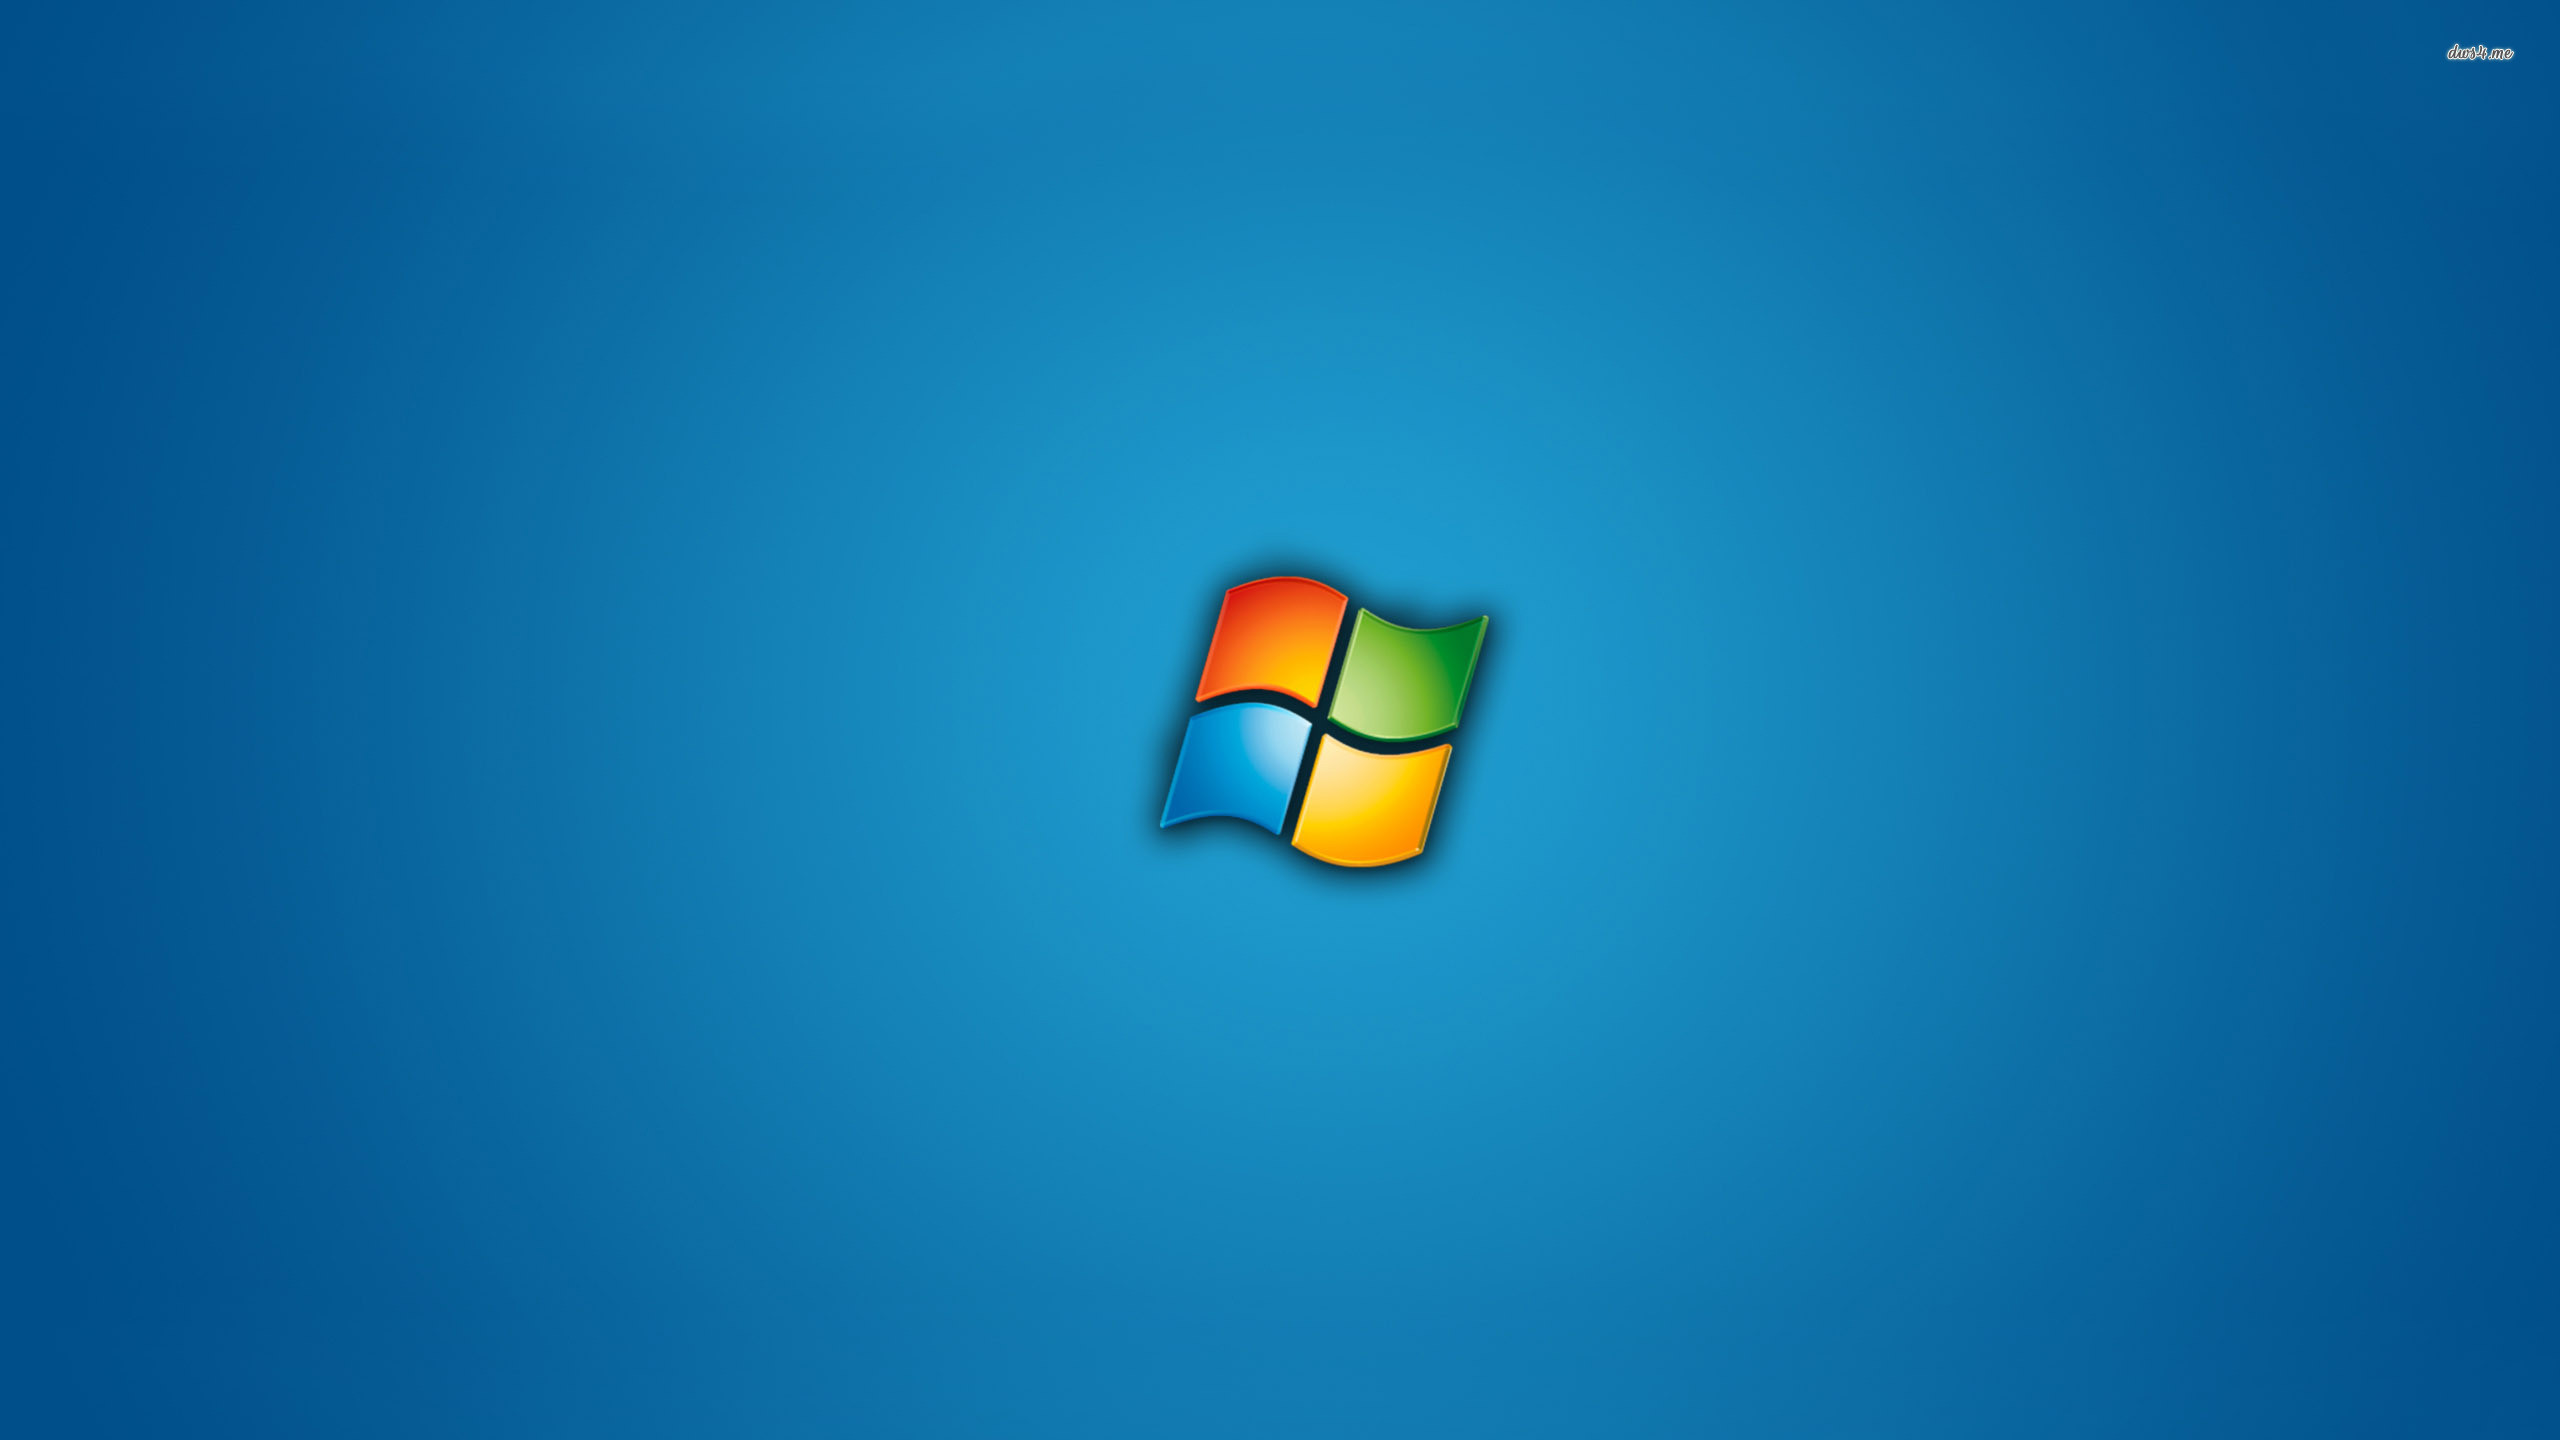 2560x1440 Windows 8 Logo Wallpapers, Most Beautiful Wallpapers of Windows 8 .